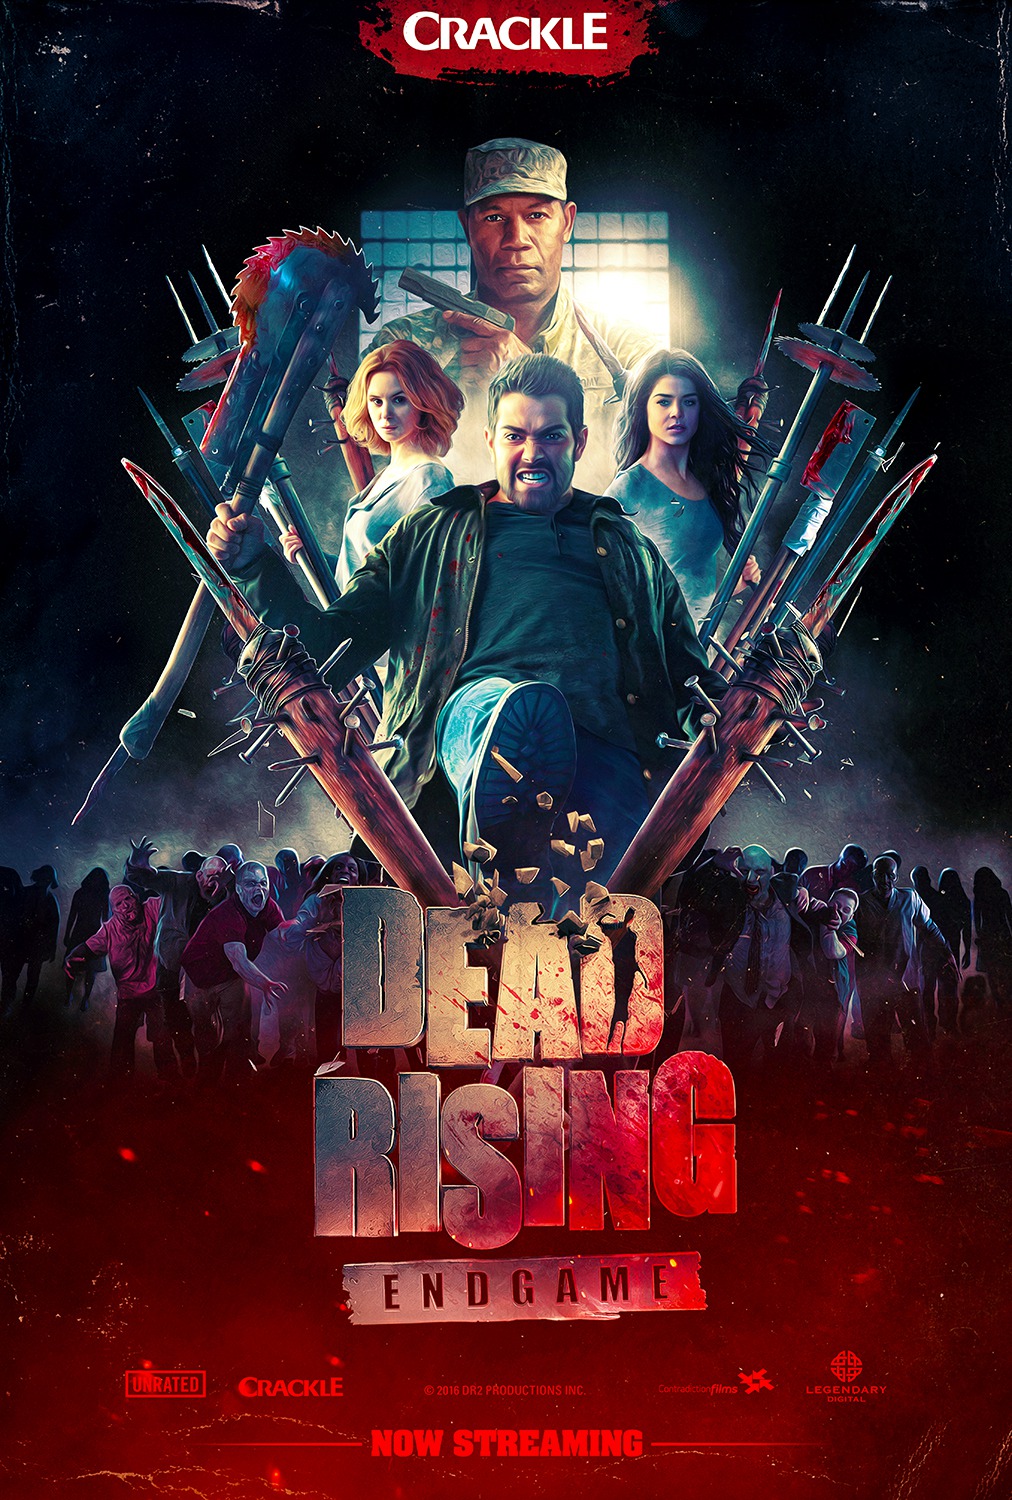 Dead Rising: Endgame (#5 of 5): Extra Large Movie Poster Image - IMP Awards